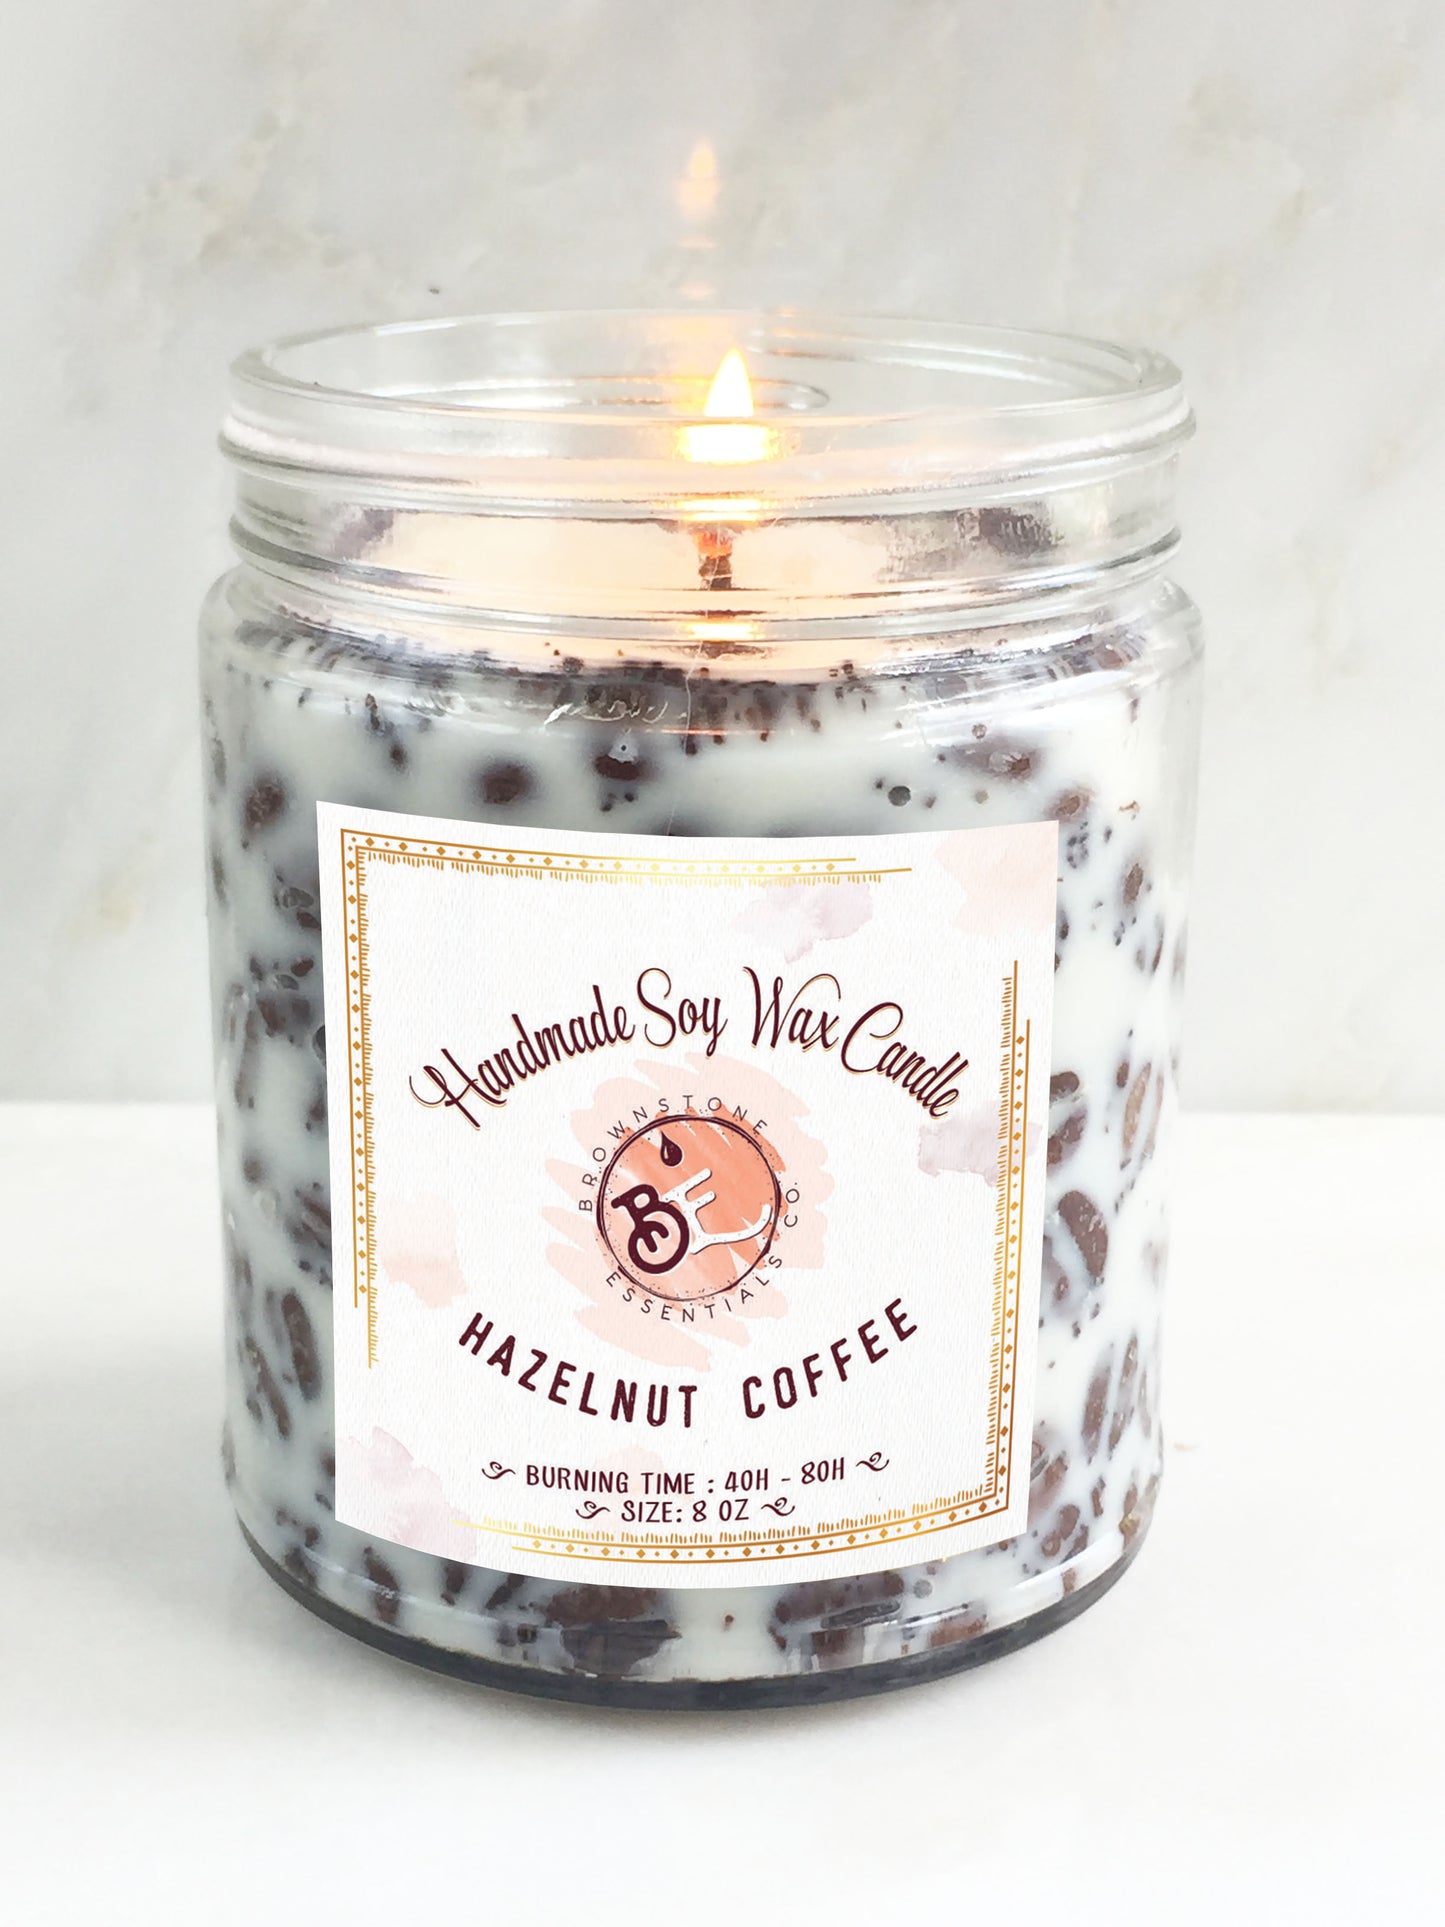 The Coffee Candle